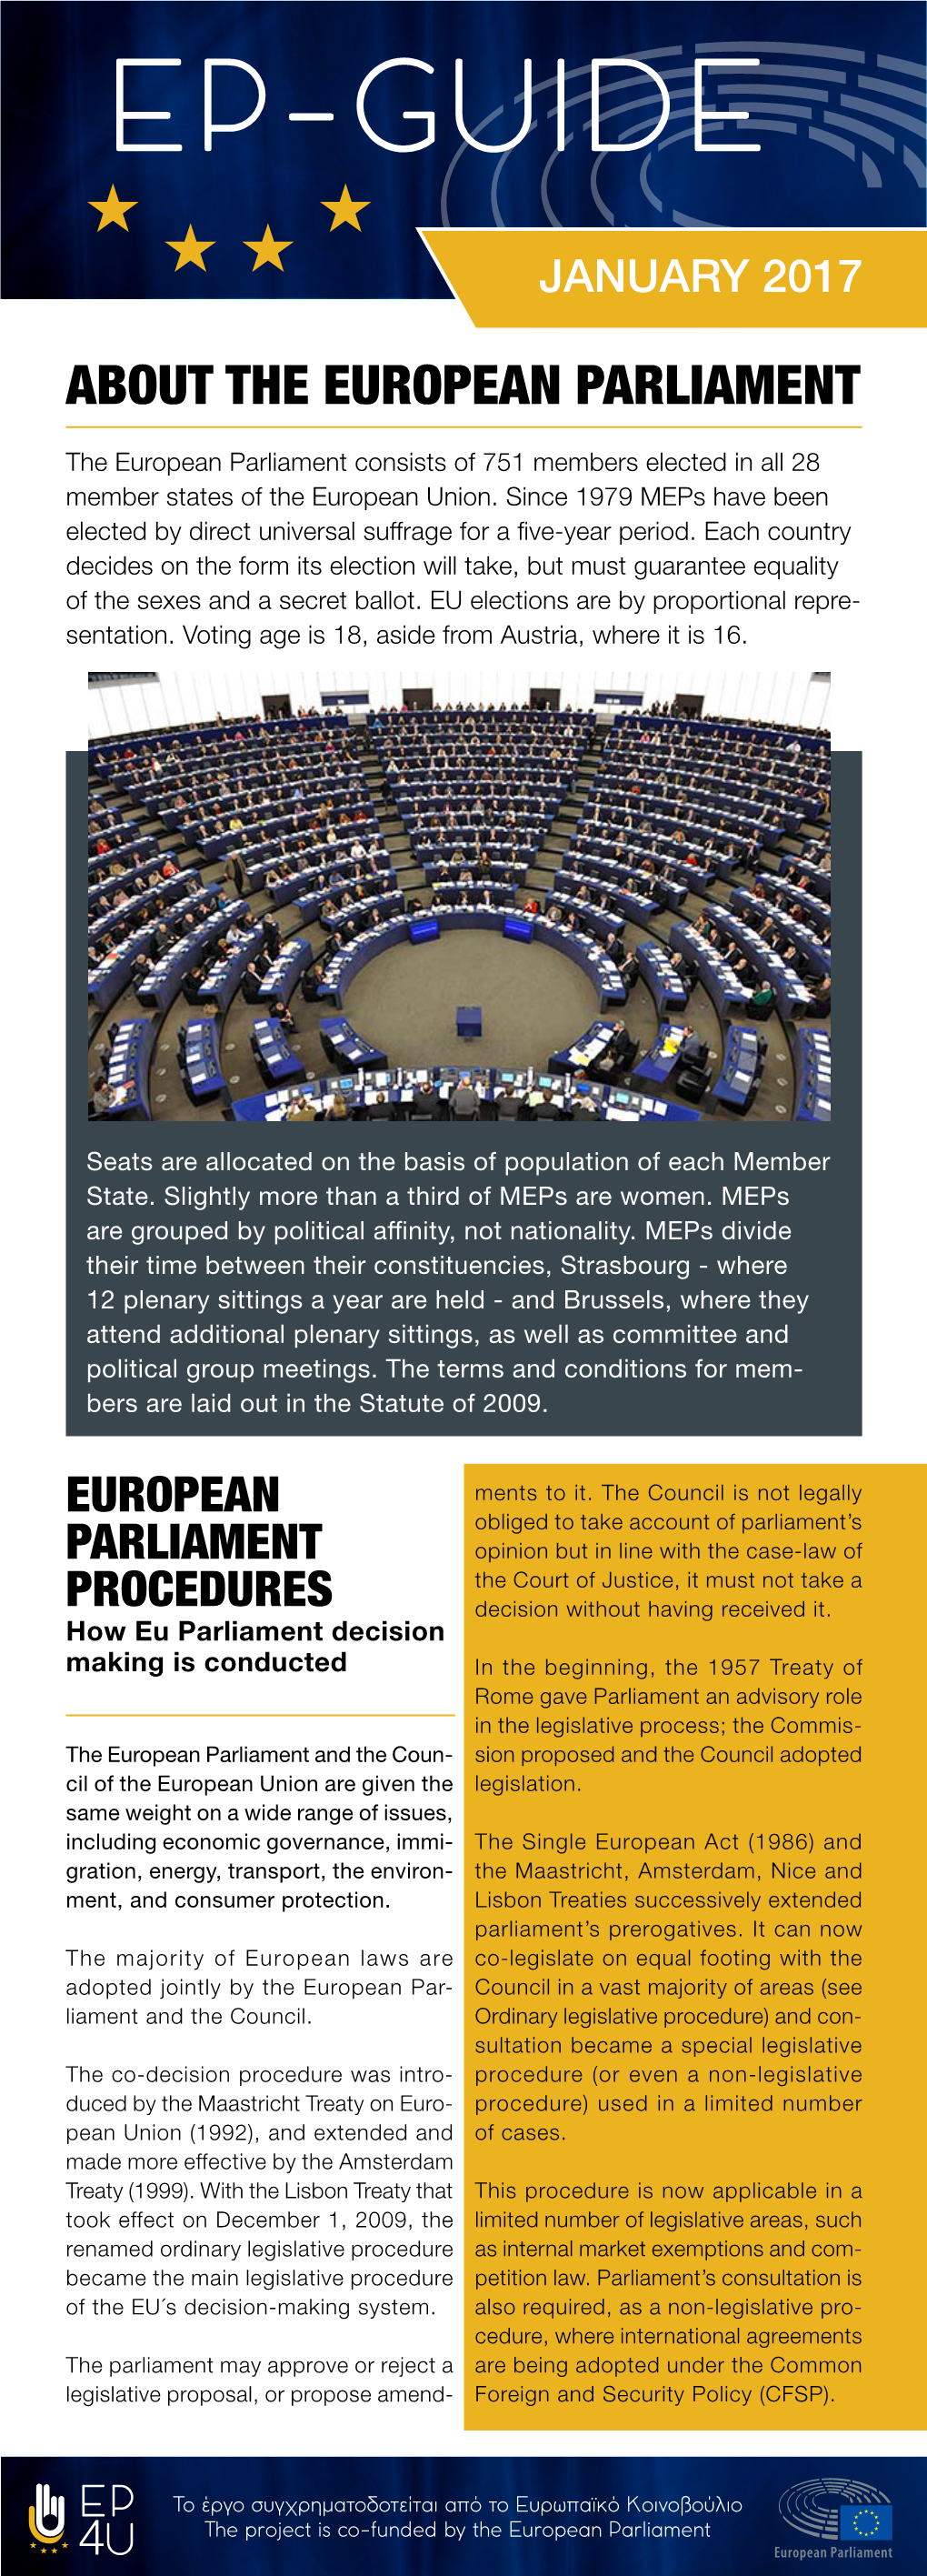 About the European Parliament